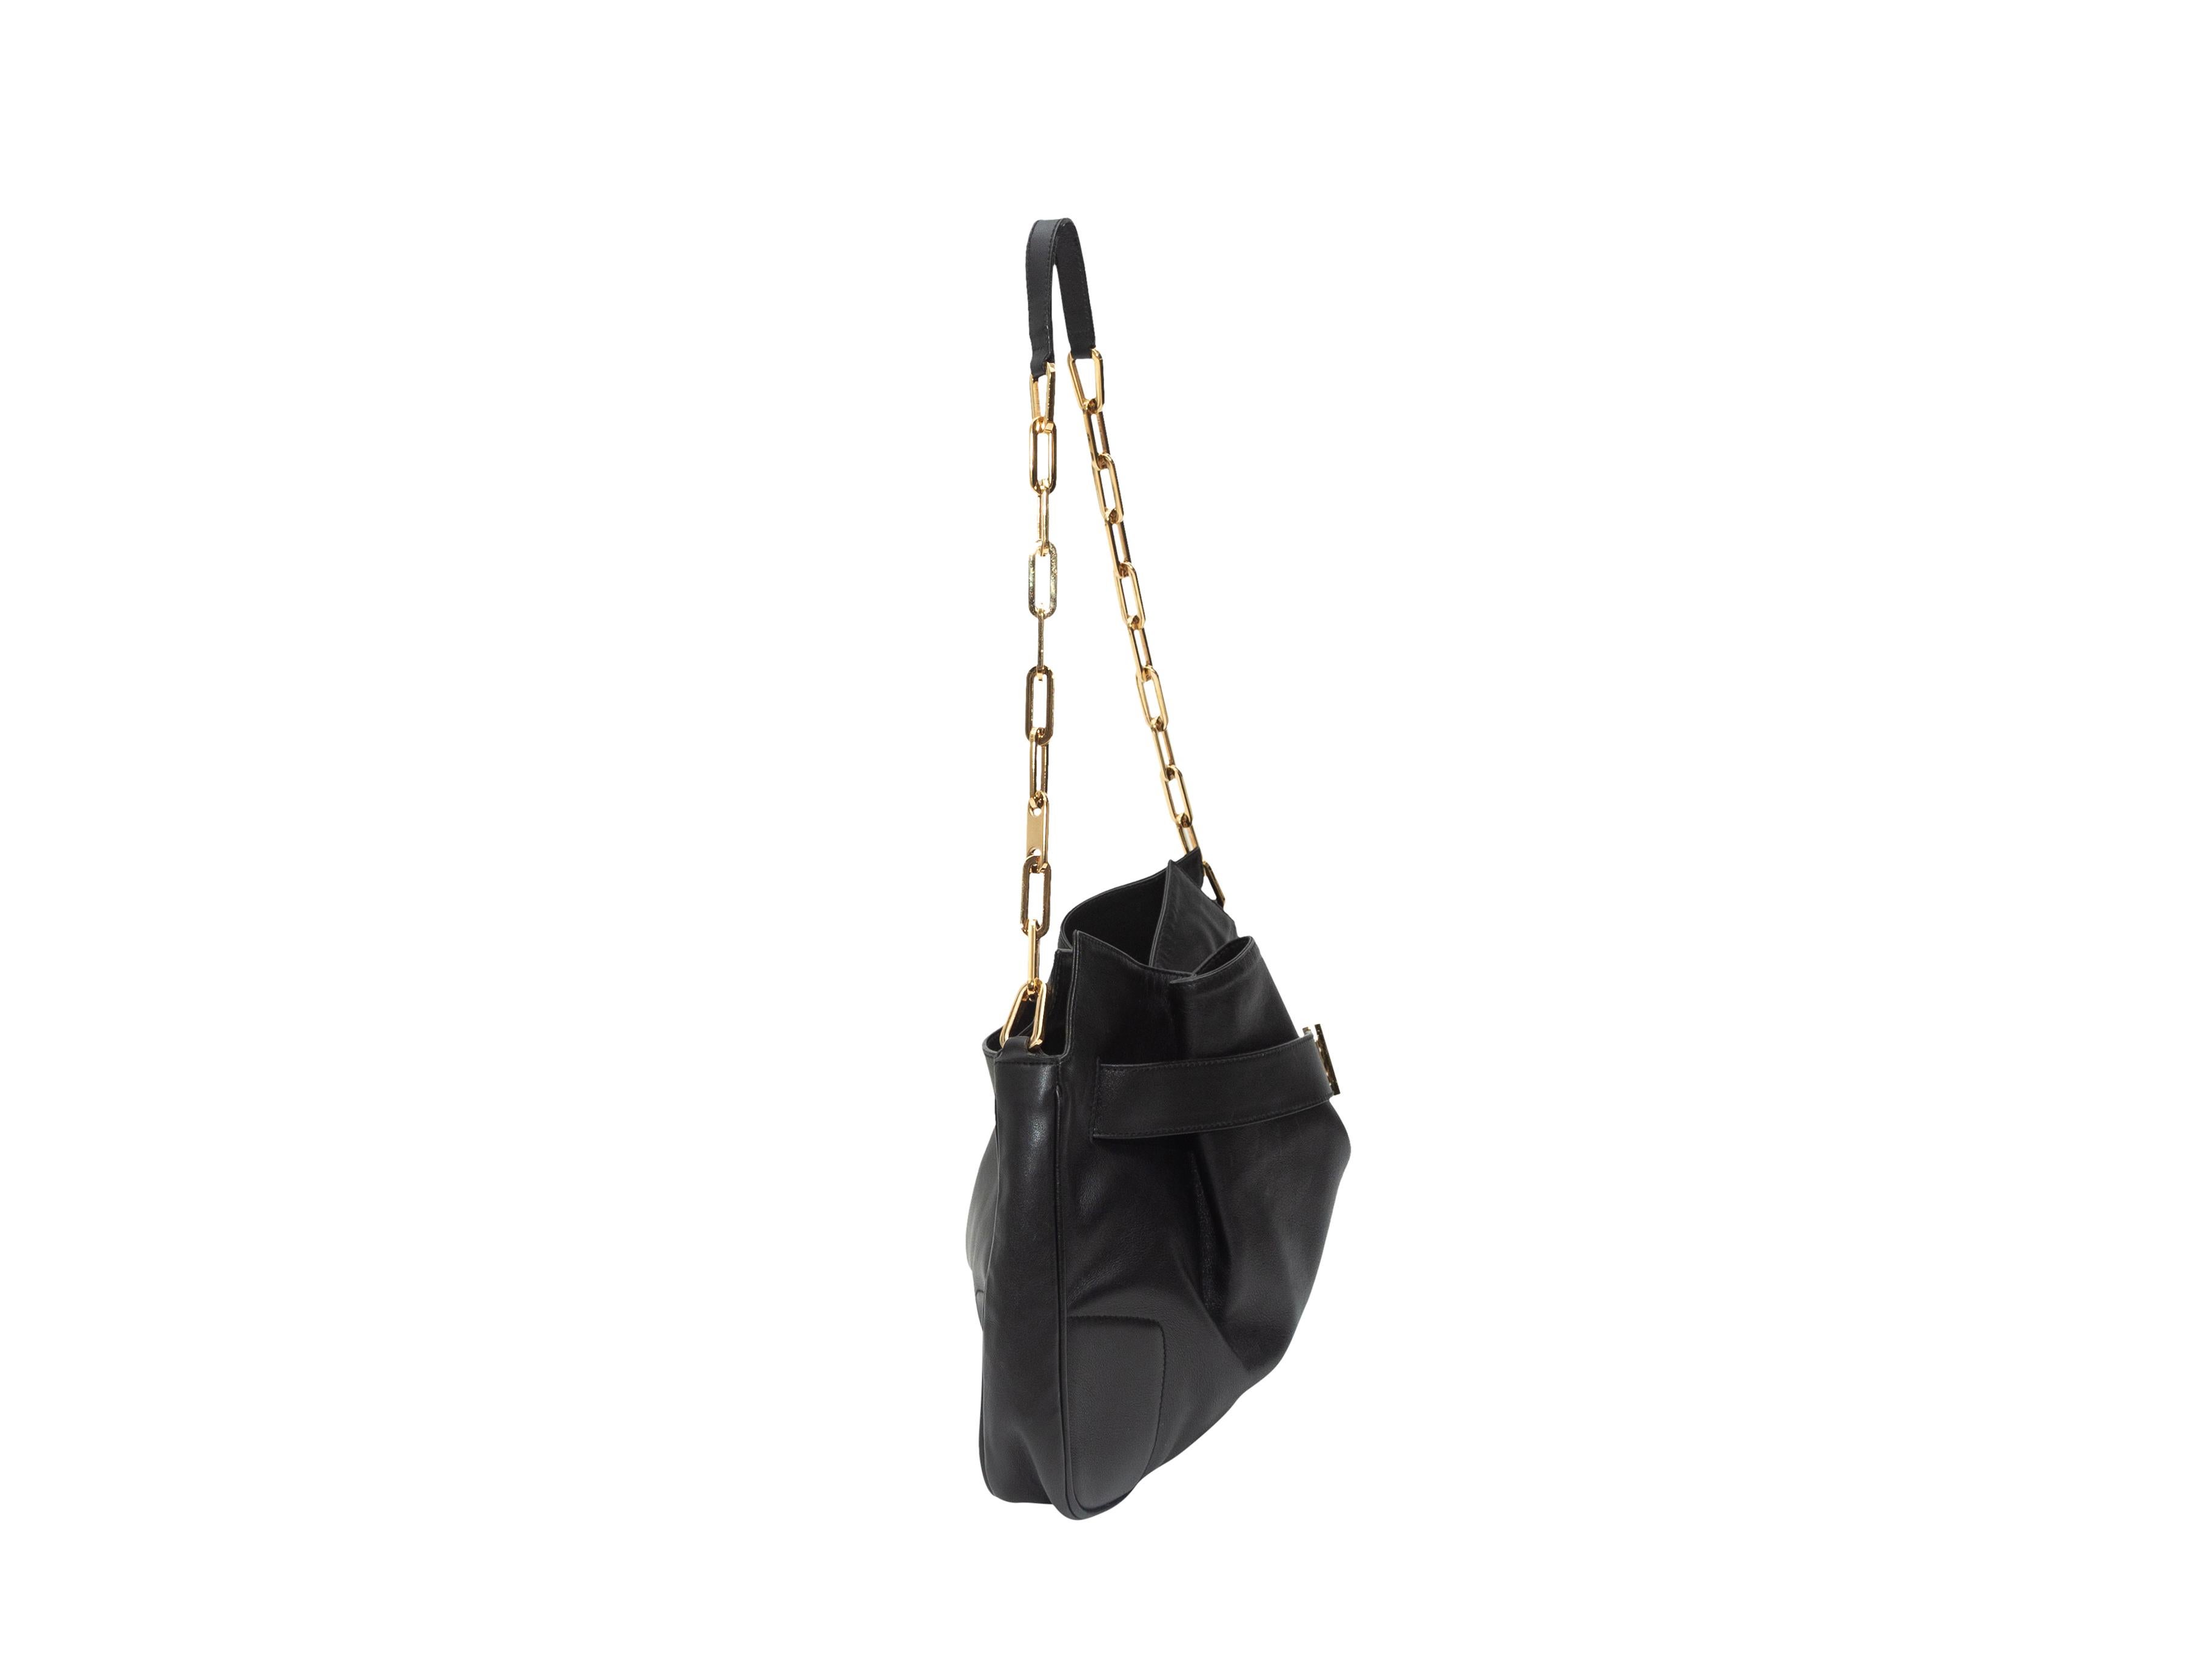 Product details: Black leather shoulder bag by Gucci. Gold-tone hardware. Interior zip pocket. Chain-link and leather shoulder strap. Buckle accent at front. 12